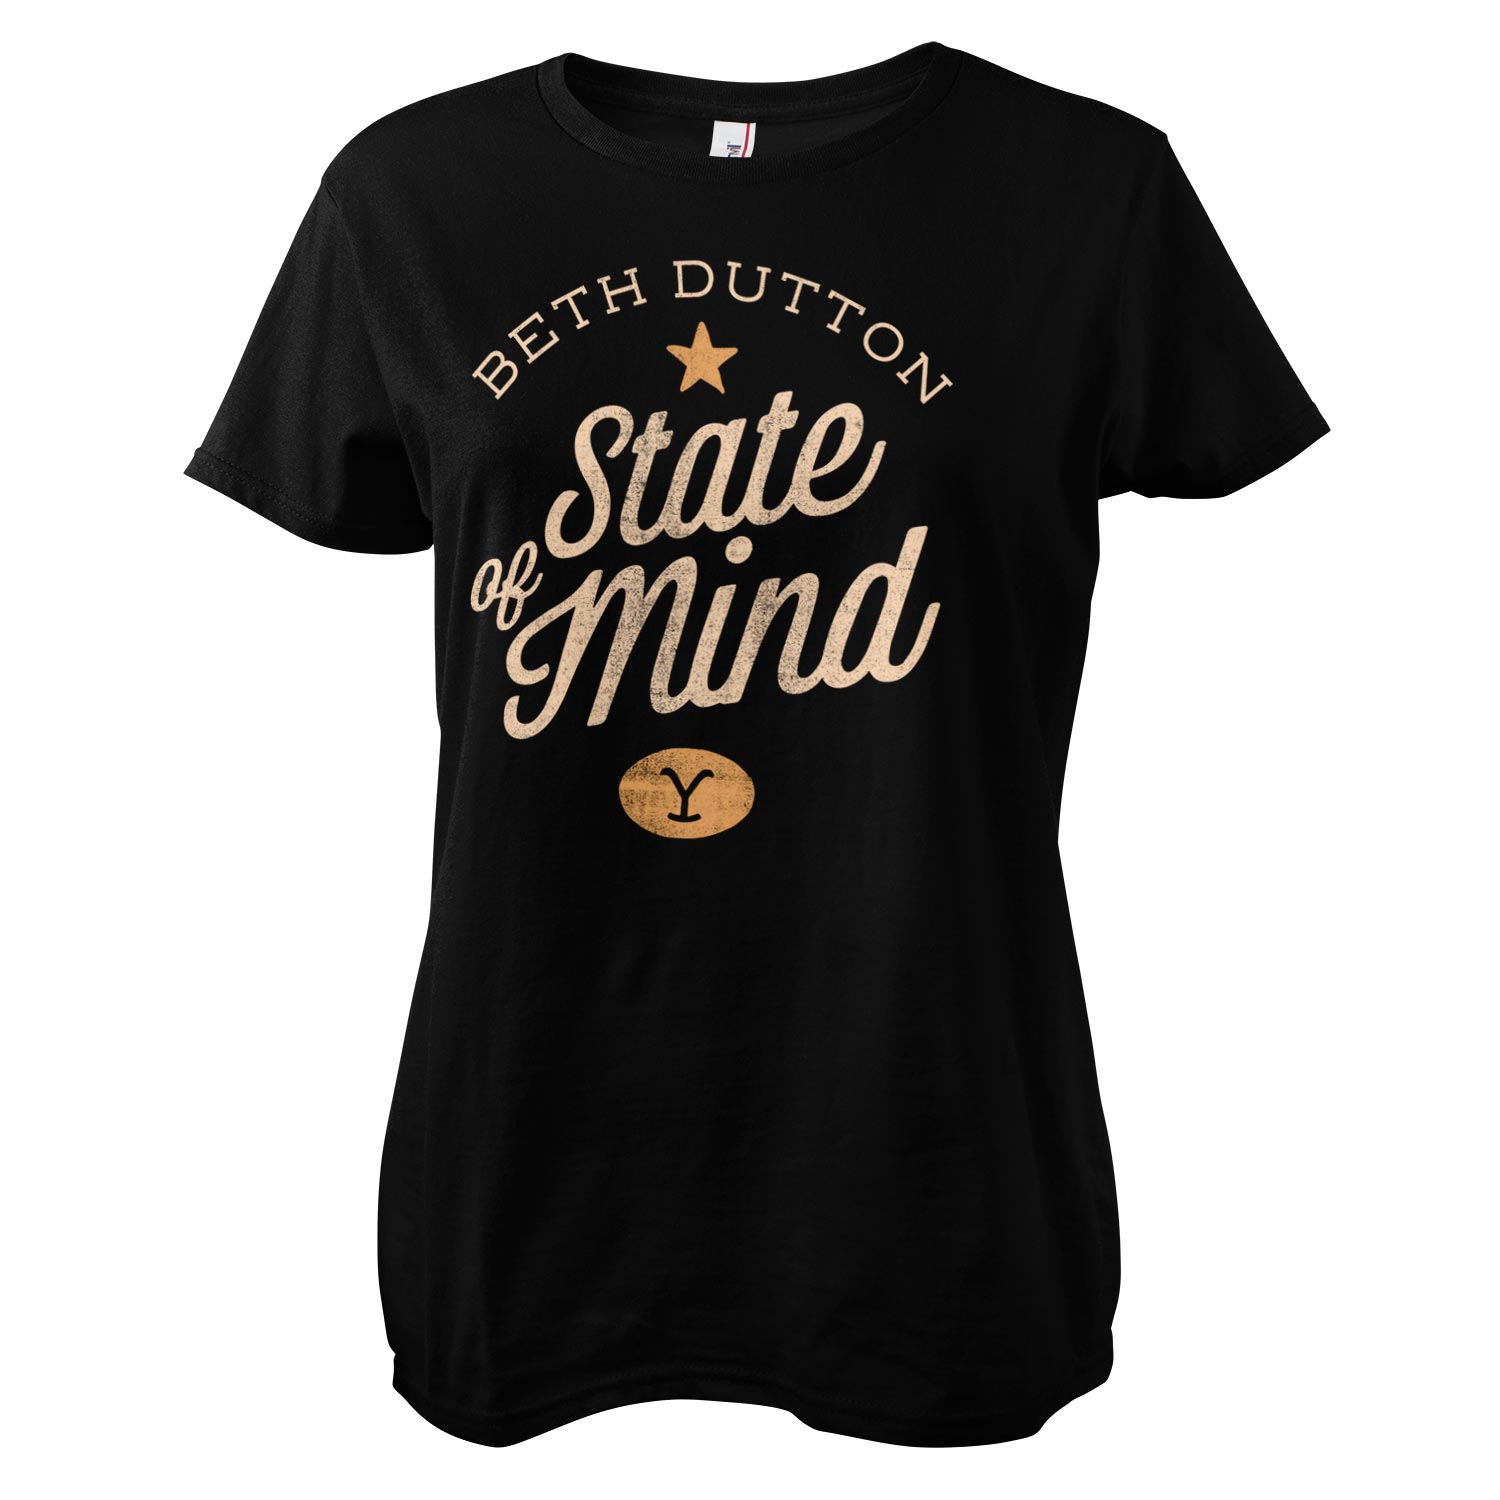 Beth Dutton State Of Mind Girly Tee